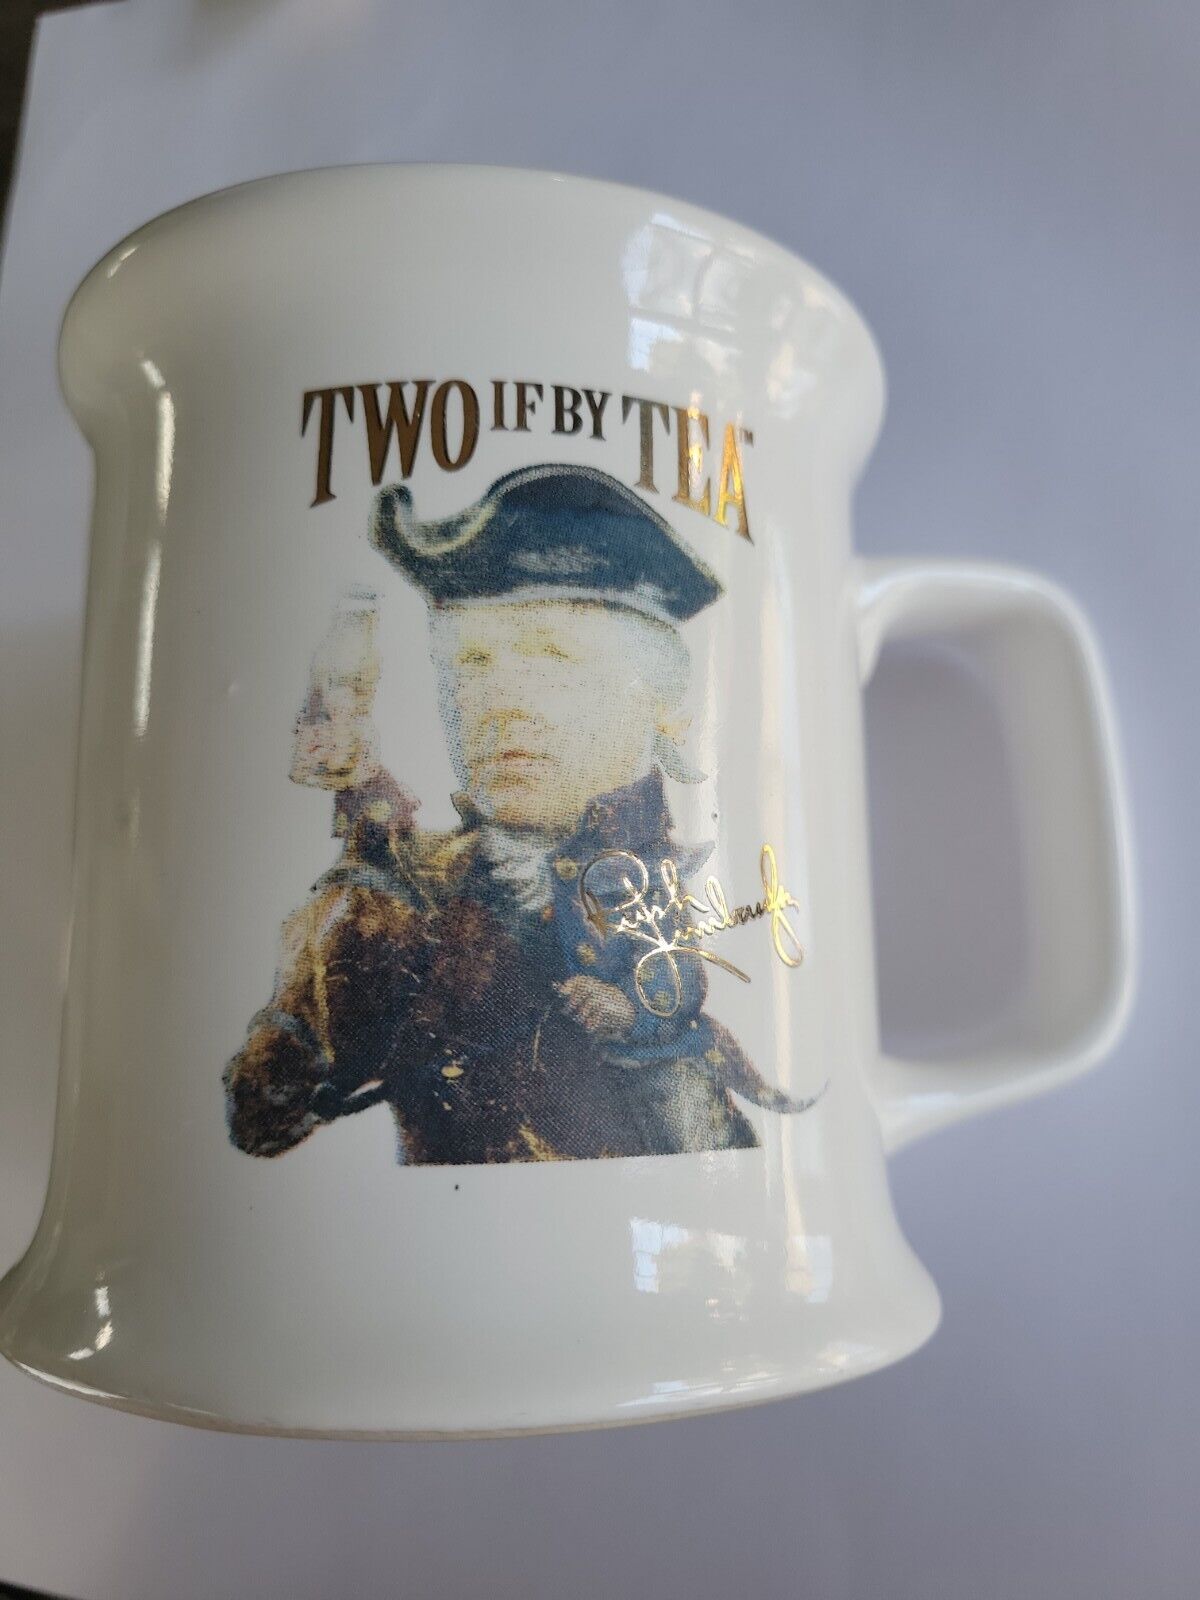 Rush Limbaugh Coffee Mug The Liberals Are Coming Made in USA Two if by Tea